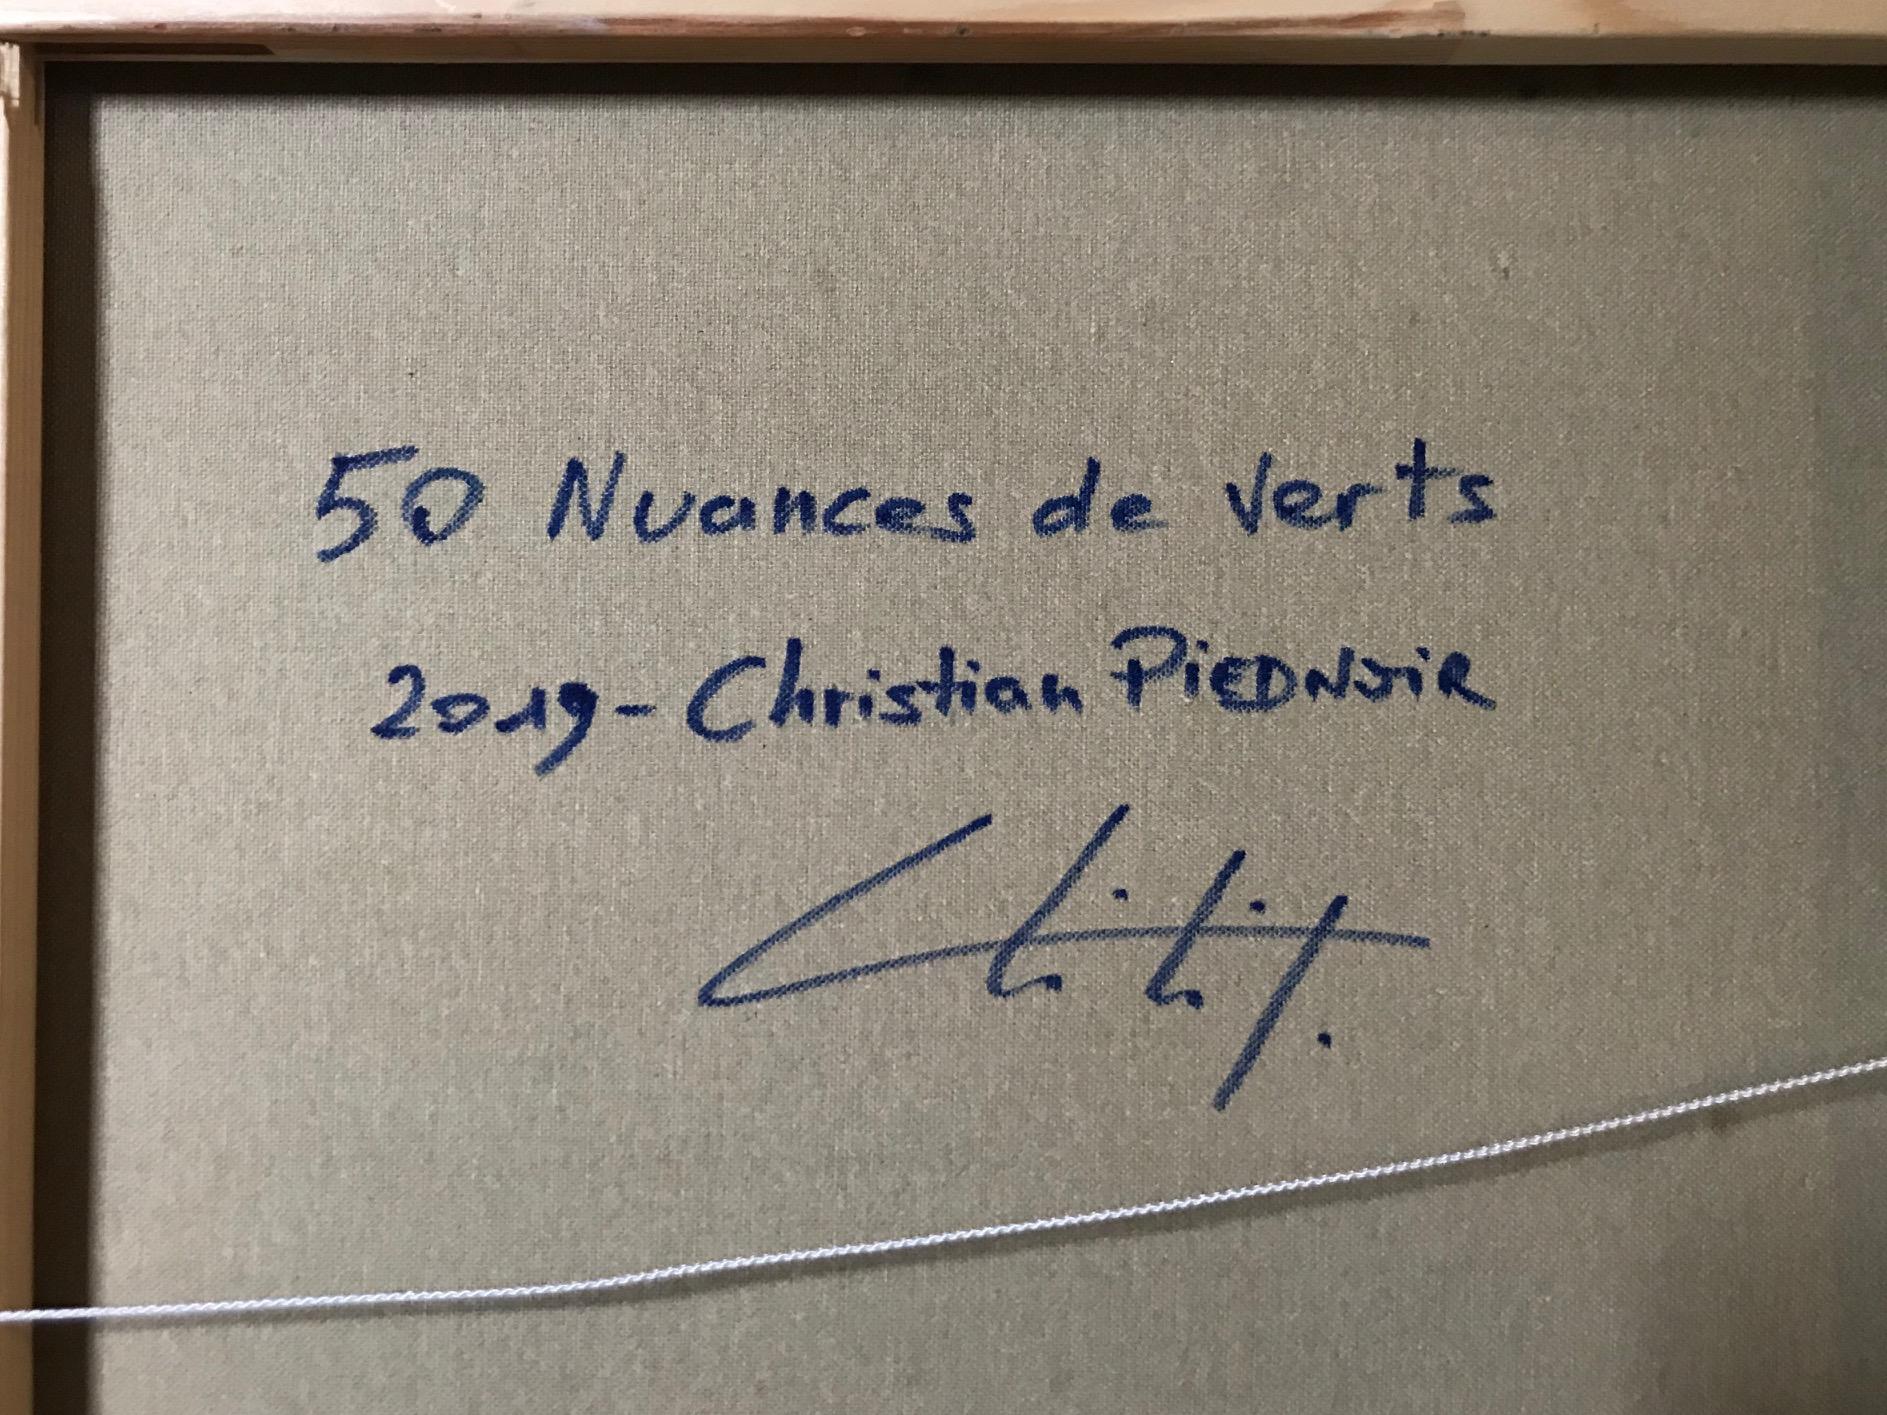 '50 nuances de verts' (50 shades of green) is an original unique acrylic on canvas painting by Christian Piednoir painted in 2019.

In the words of the artist describing his artistic approach.

It all starts with the magic of the first